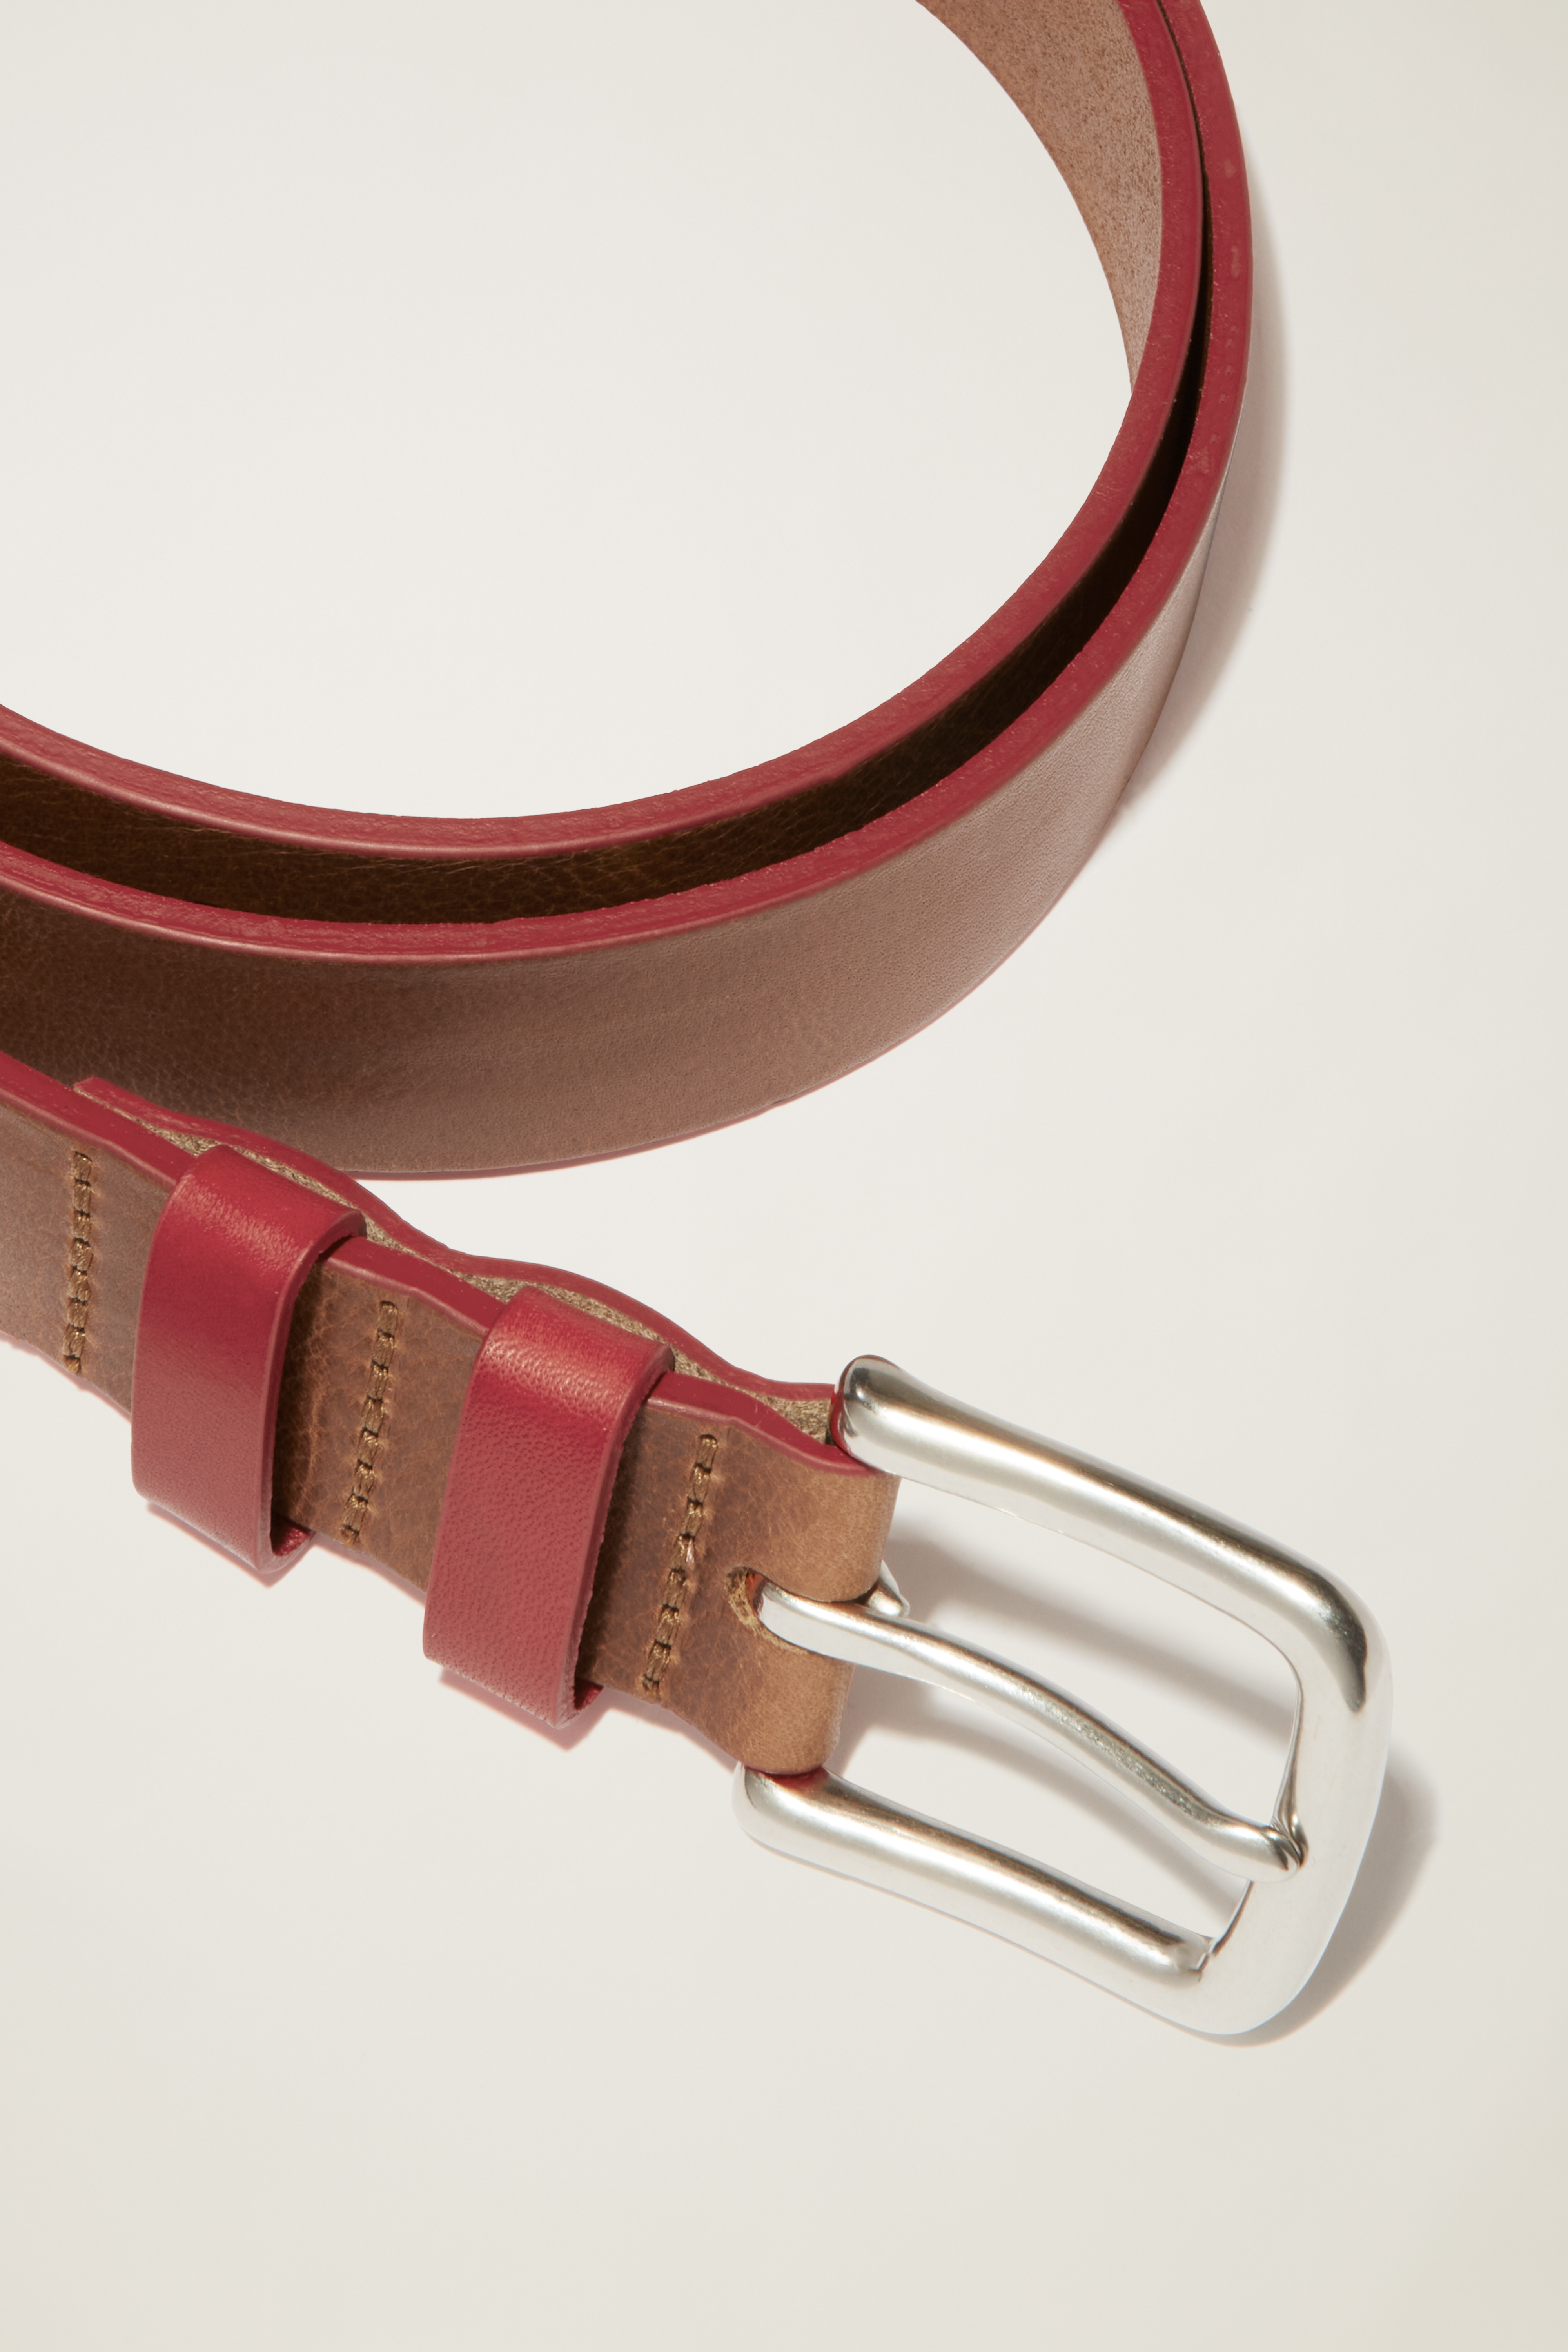 Men's Colored Edge Leather Belts